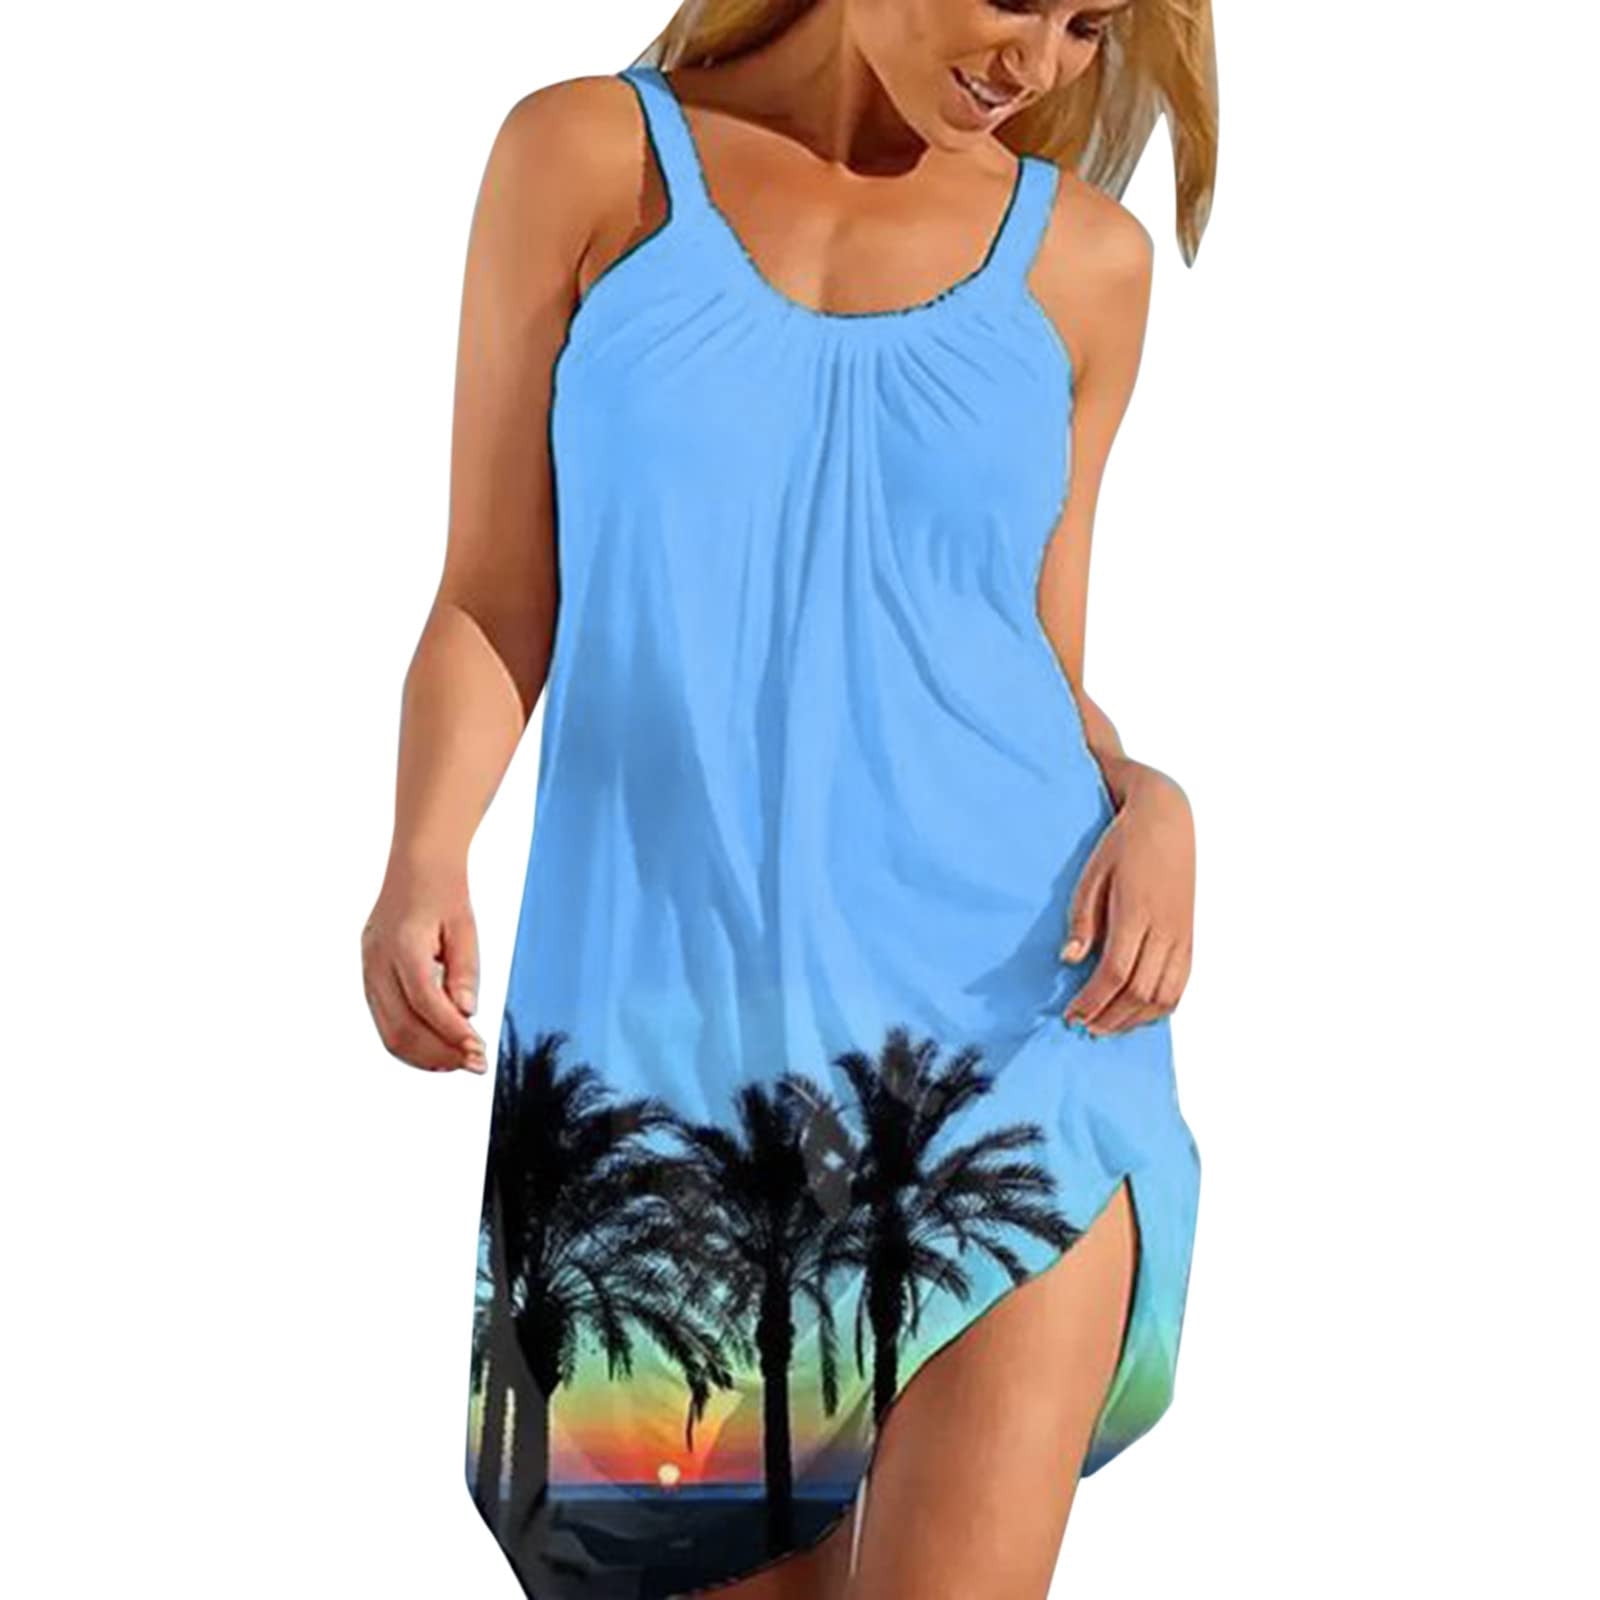 FitOOTLY Summer Dresses for Women Beach Cover Ups Sexy,Cheap  Hoodies,Fashion Under 10 Dollars Women,Womens Sales and Deals Clothing,Sale  Plus Size,1.00 Dollar Items,Clothes Deals of The Day at  Women's  Clothing store